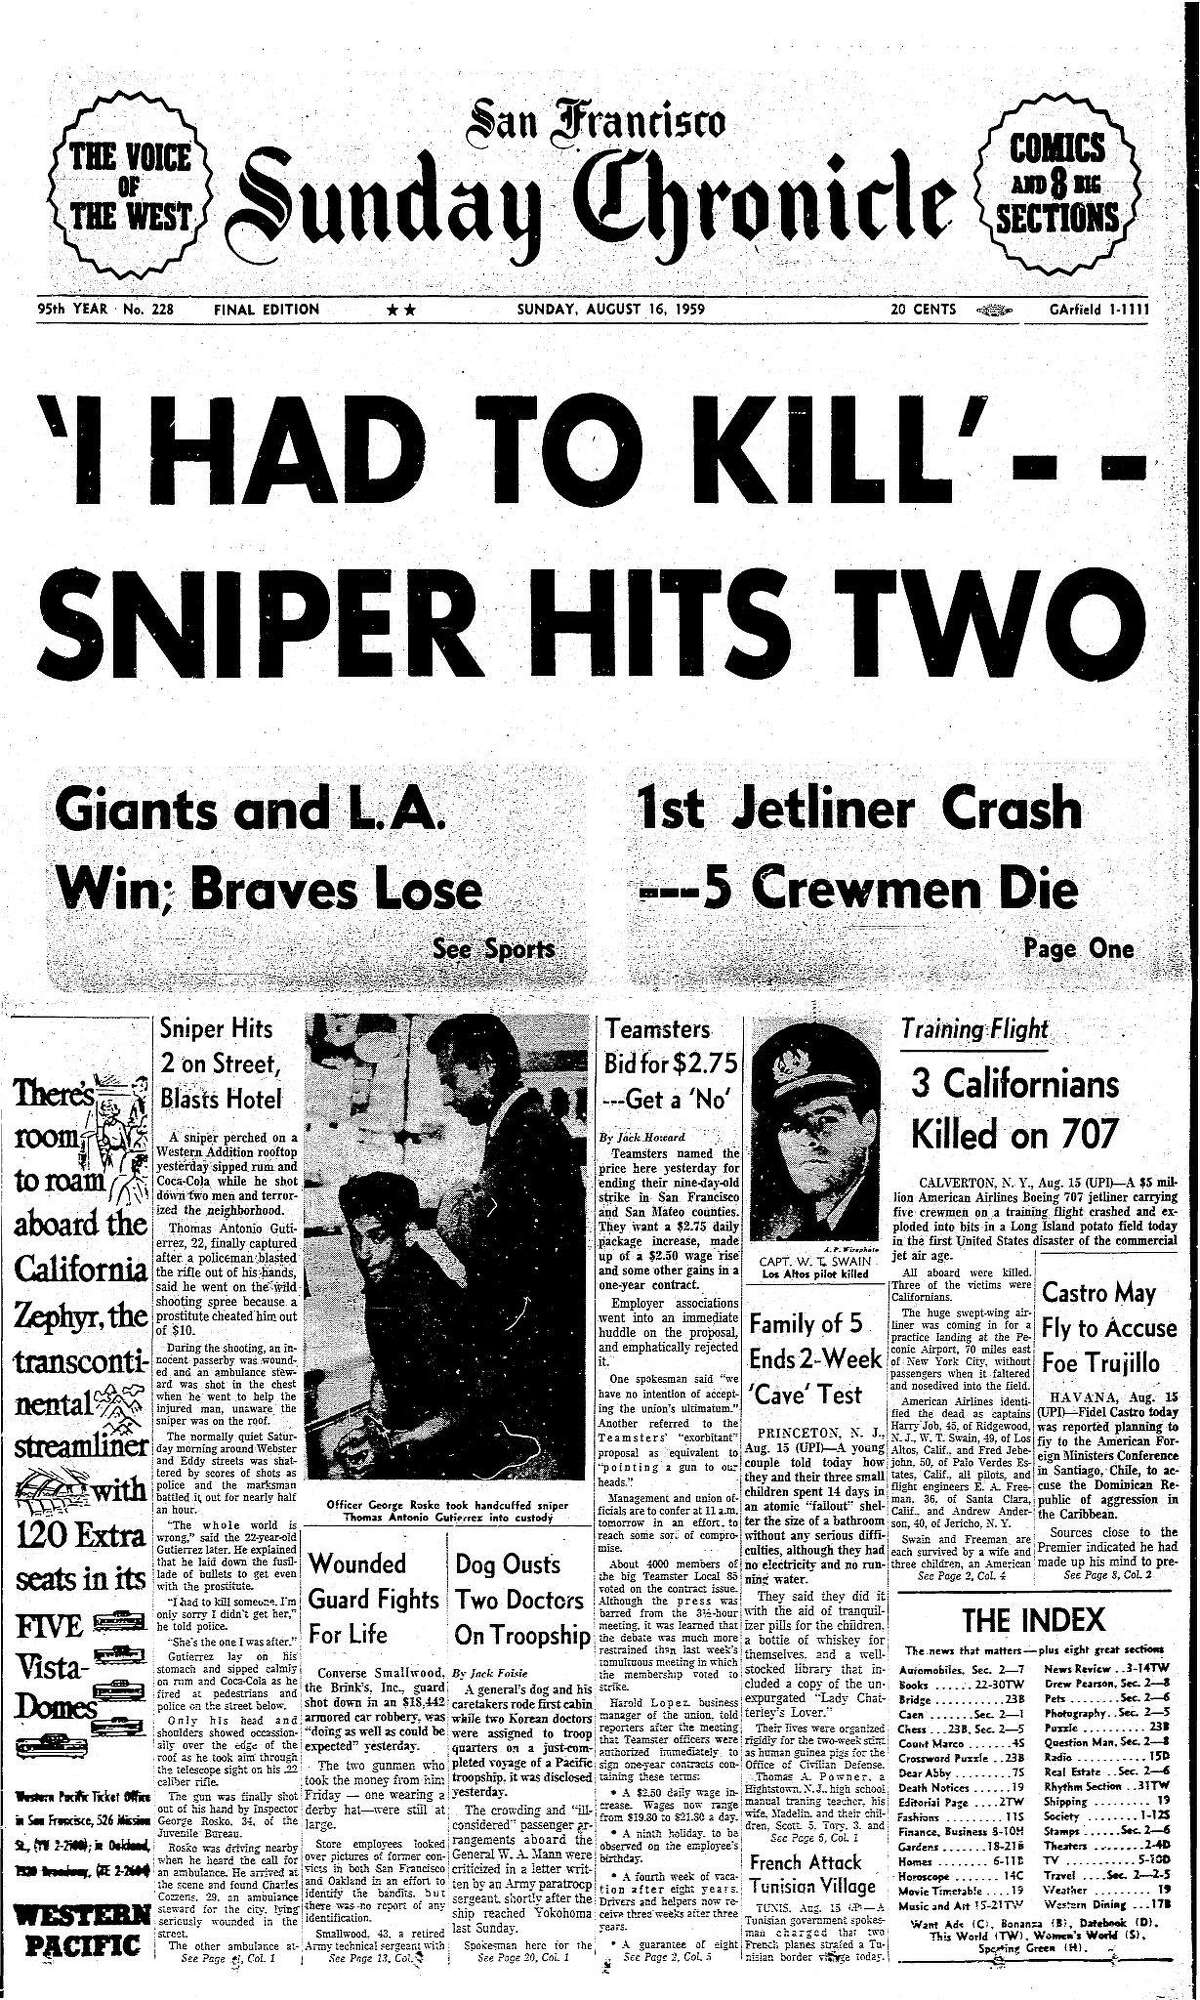 The Chronicle August 16, 1959 front page, reporting on shootings by sniper, Thomas Antonio Gutierrez